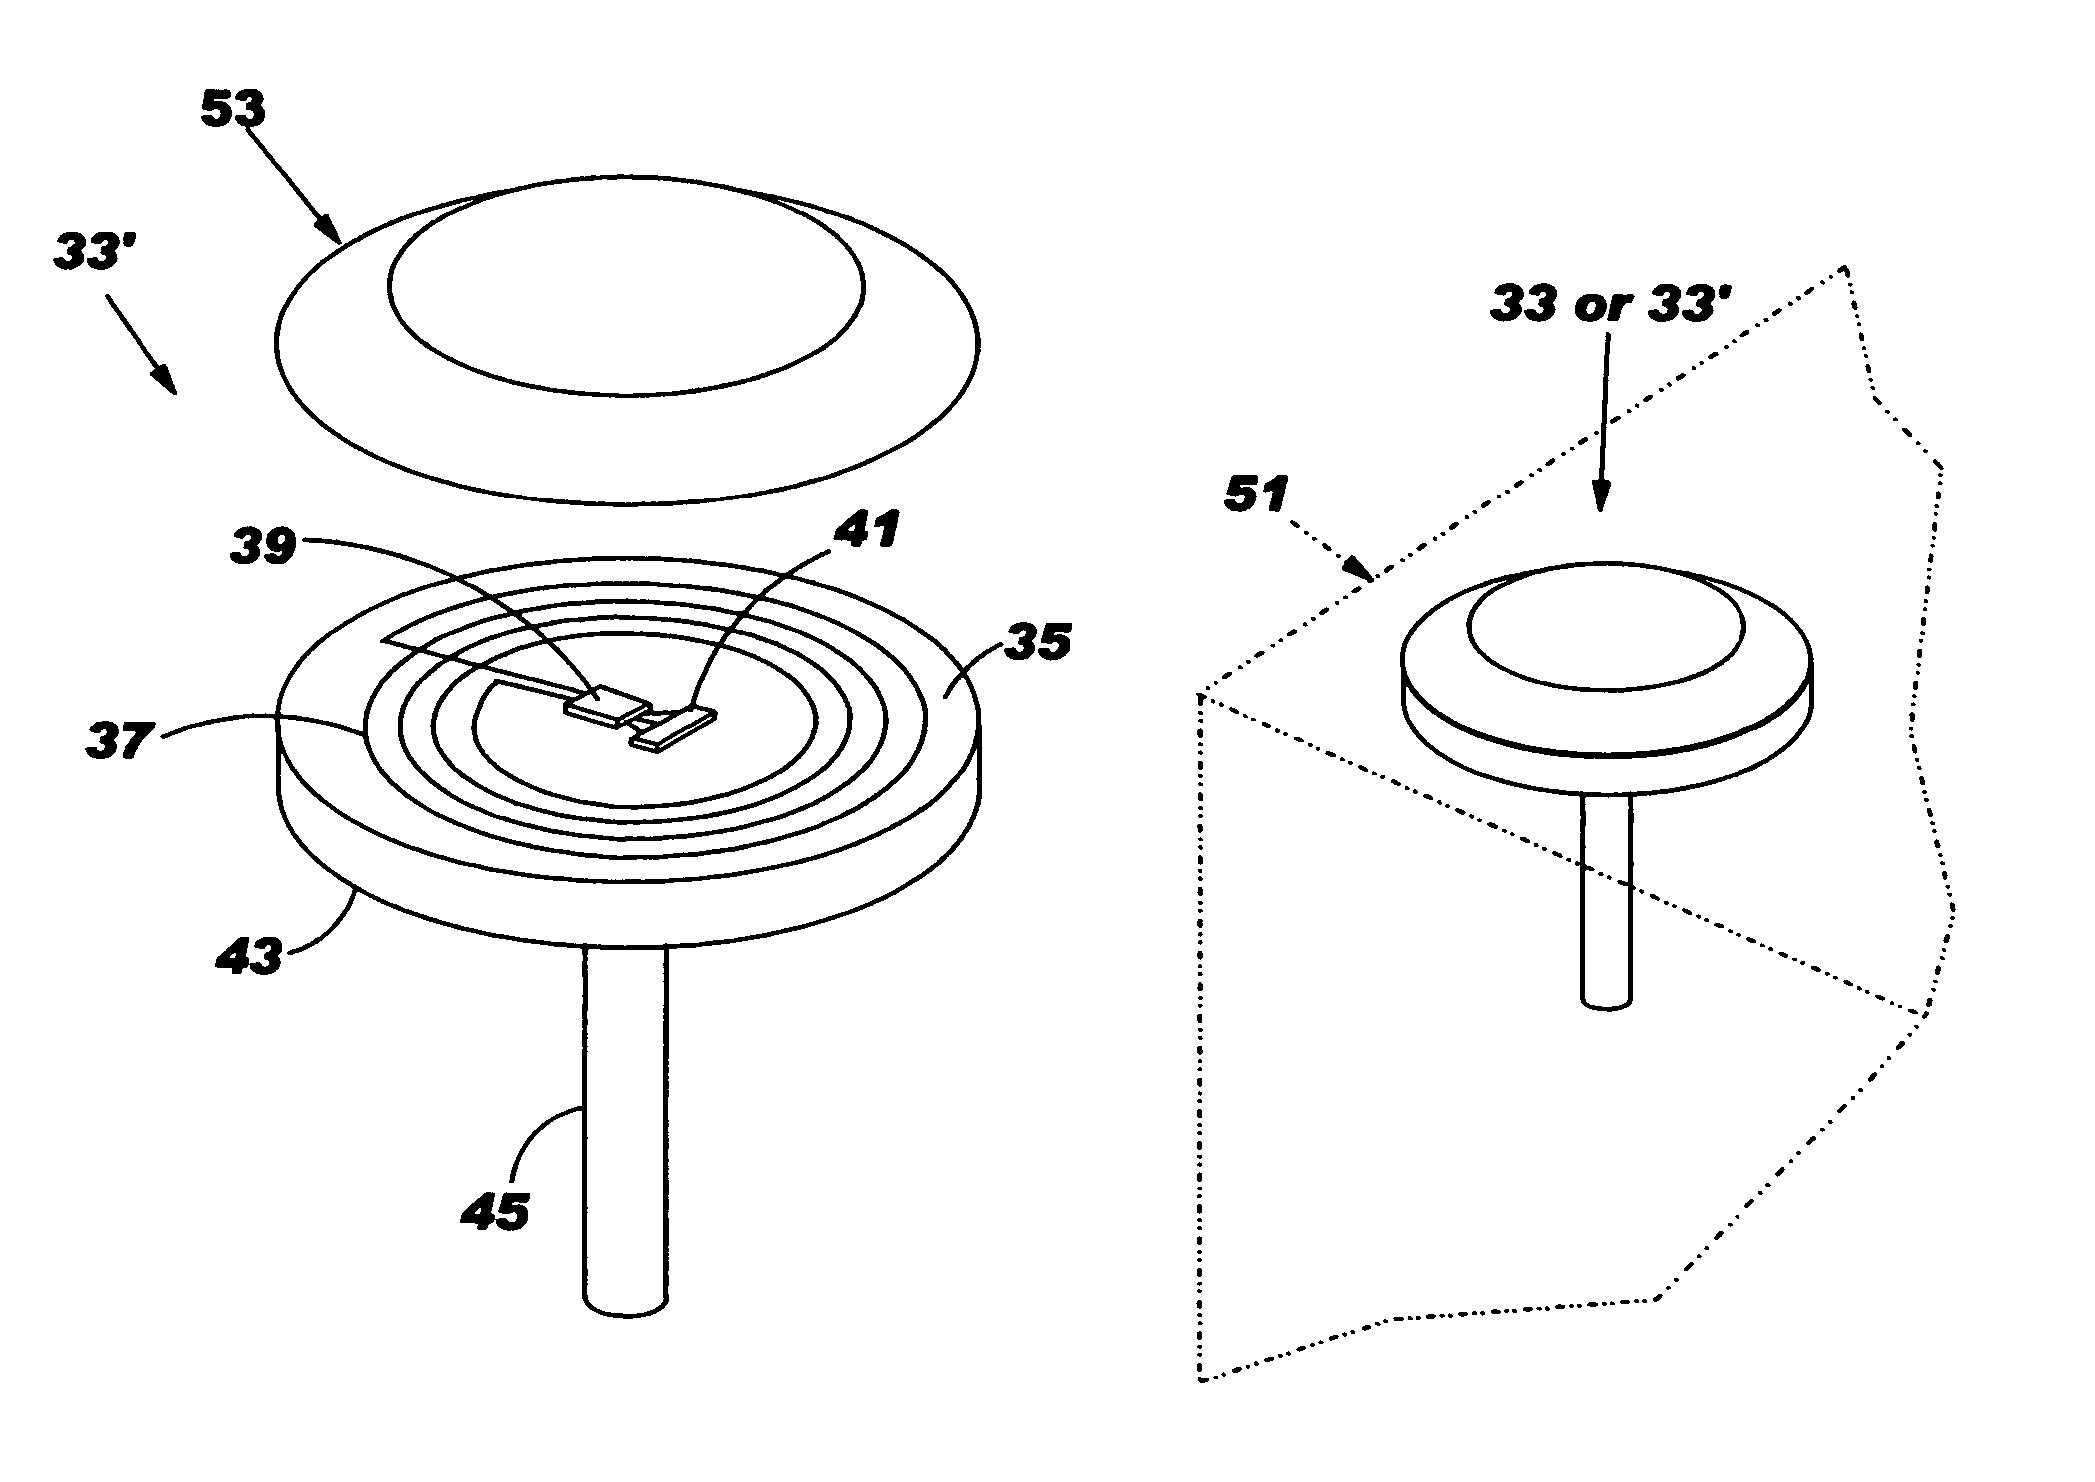 Radio frequency device for tracking goods